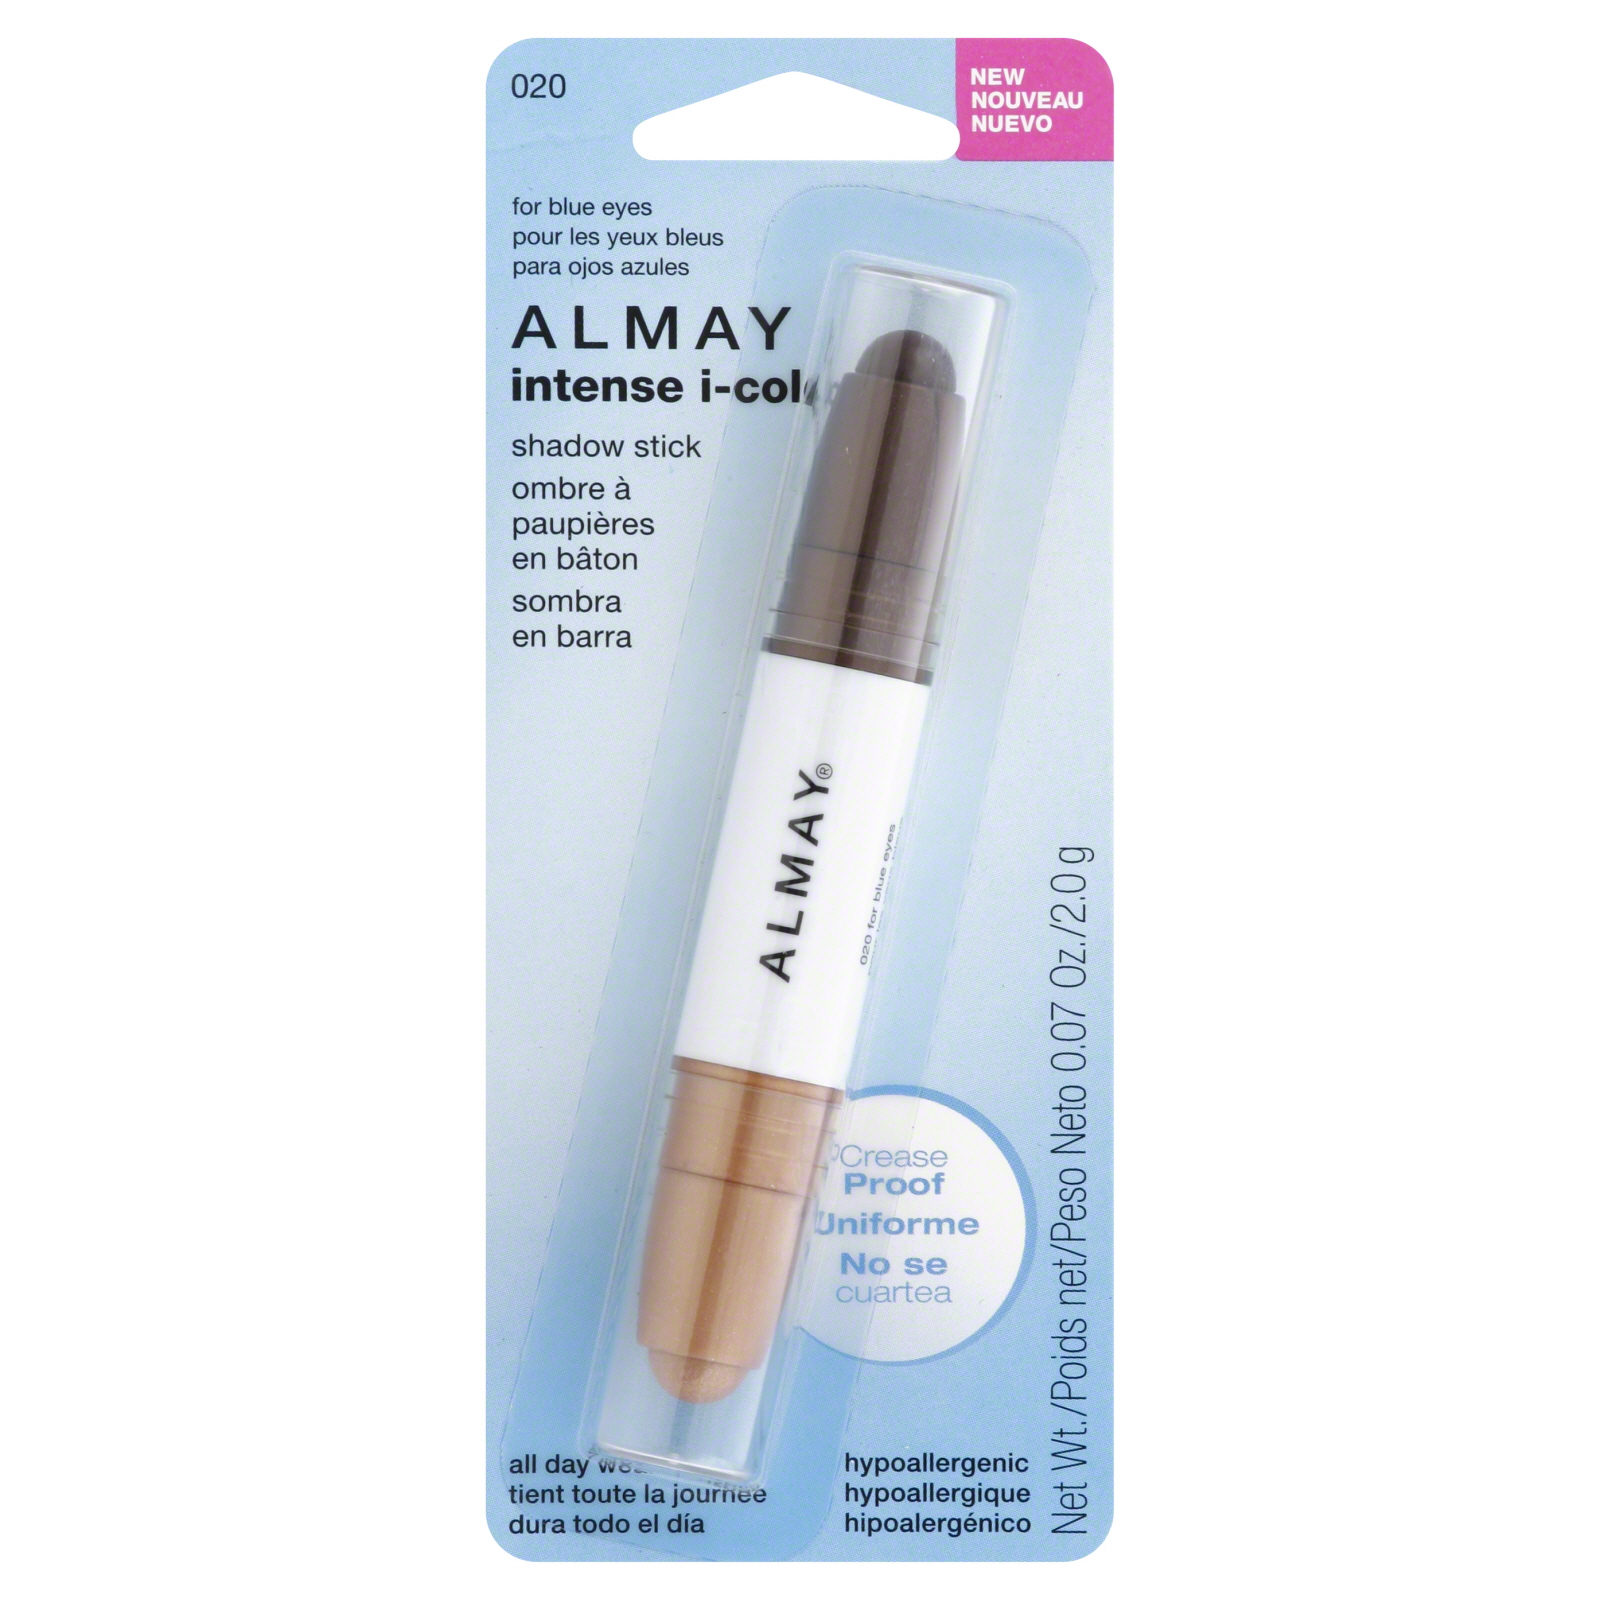 Almay intense i-color Shadow Stick, for Blue Eyes 020, 0.07 oz (2 g)